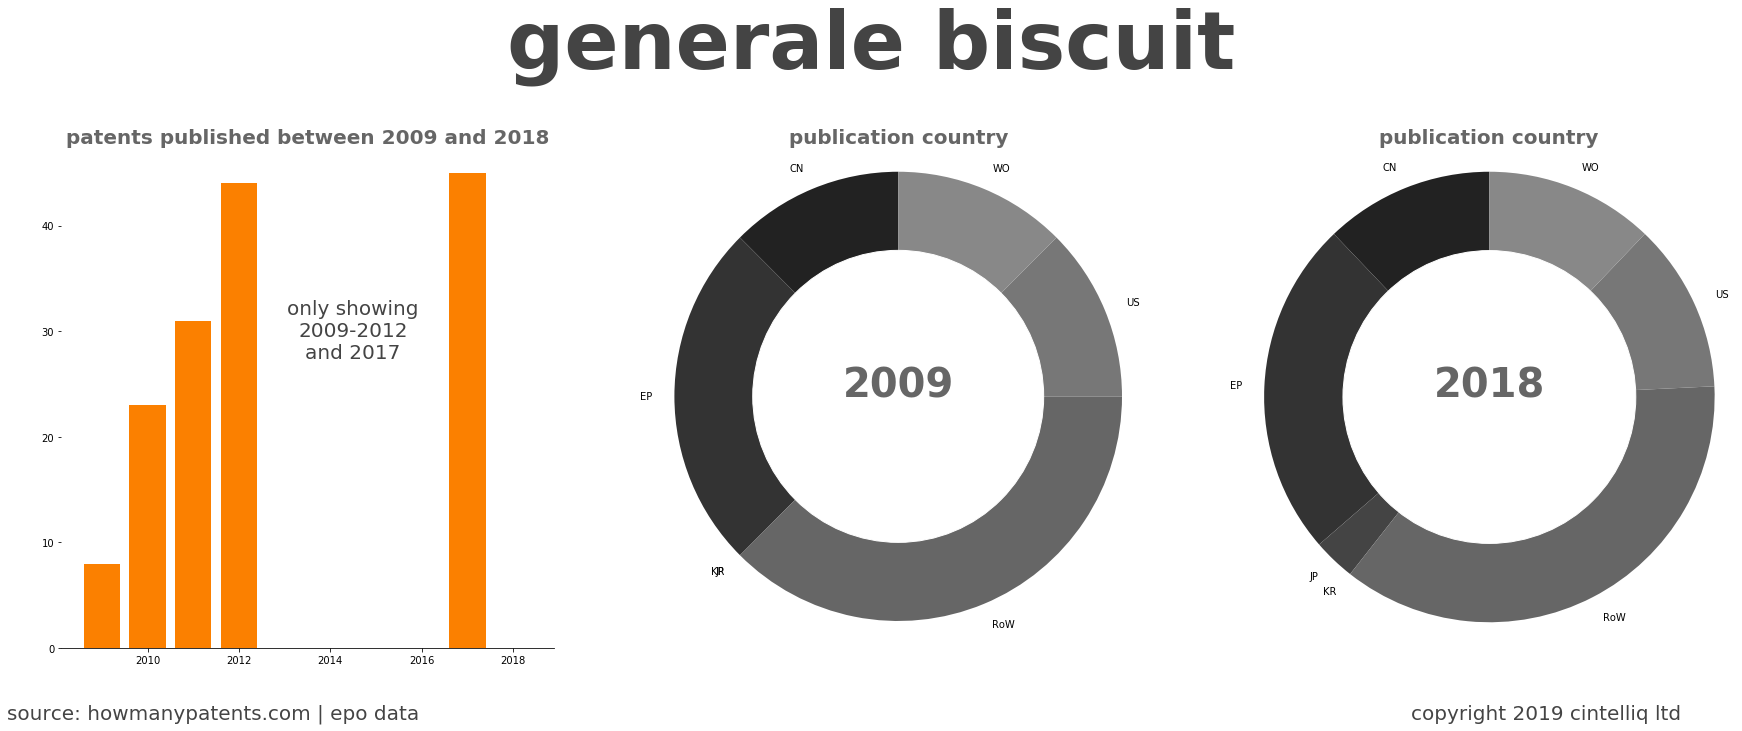 summary of patents for Generale Biscuit